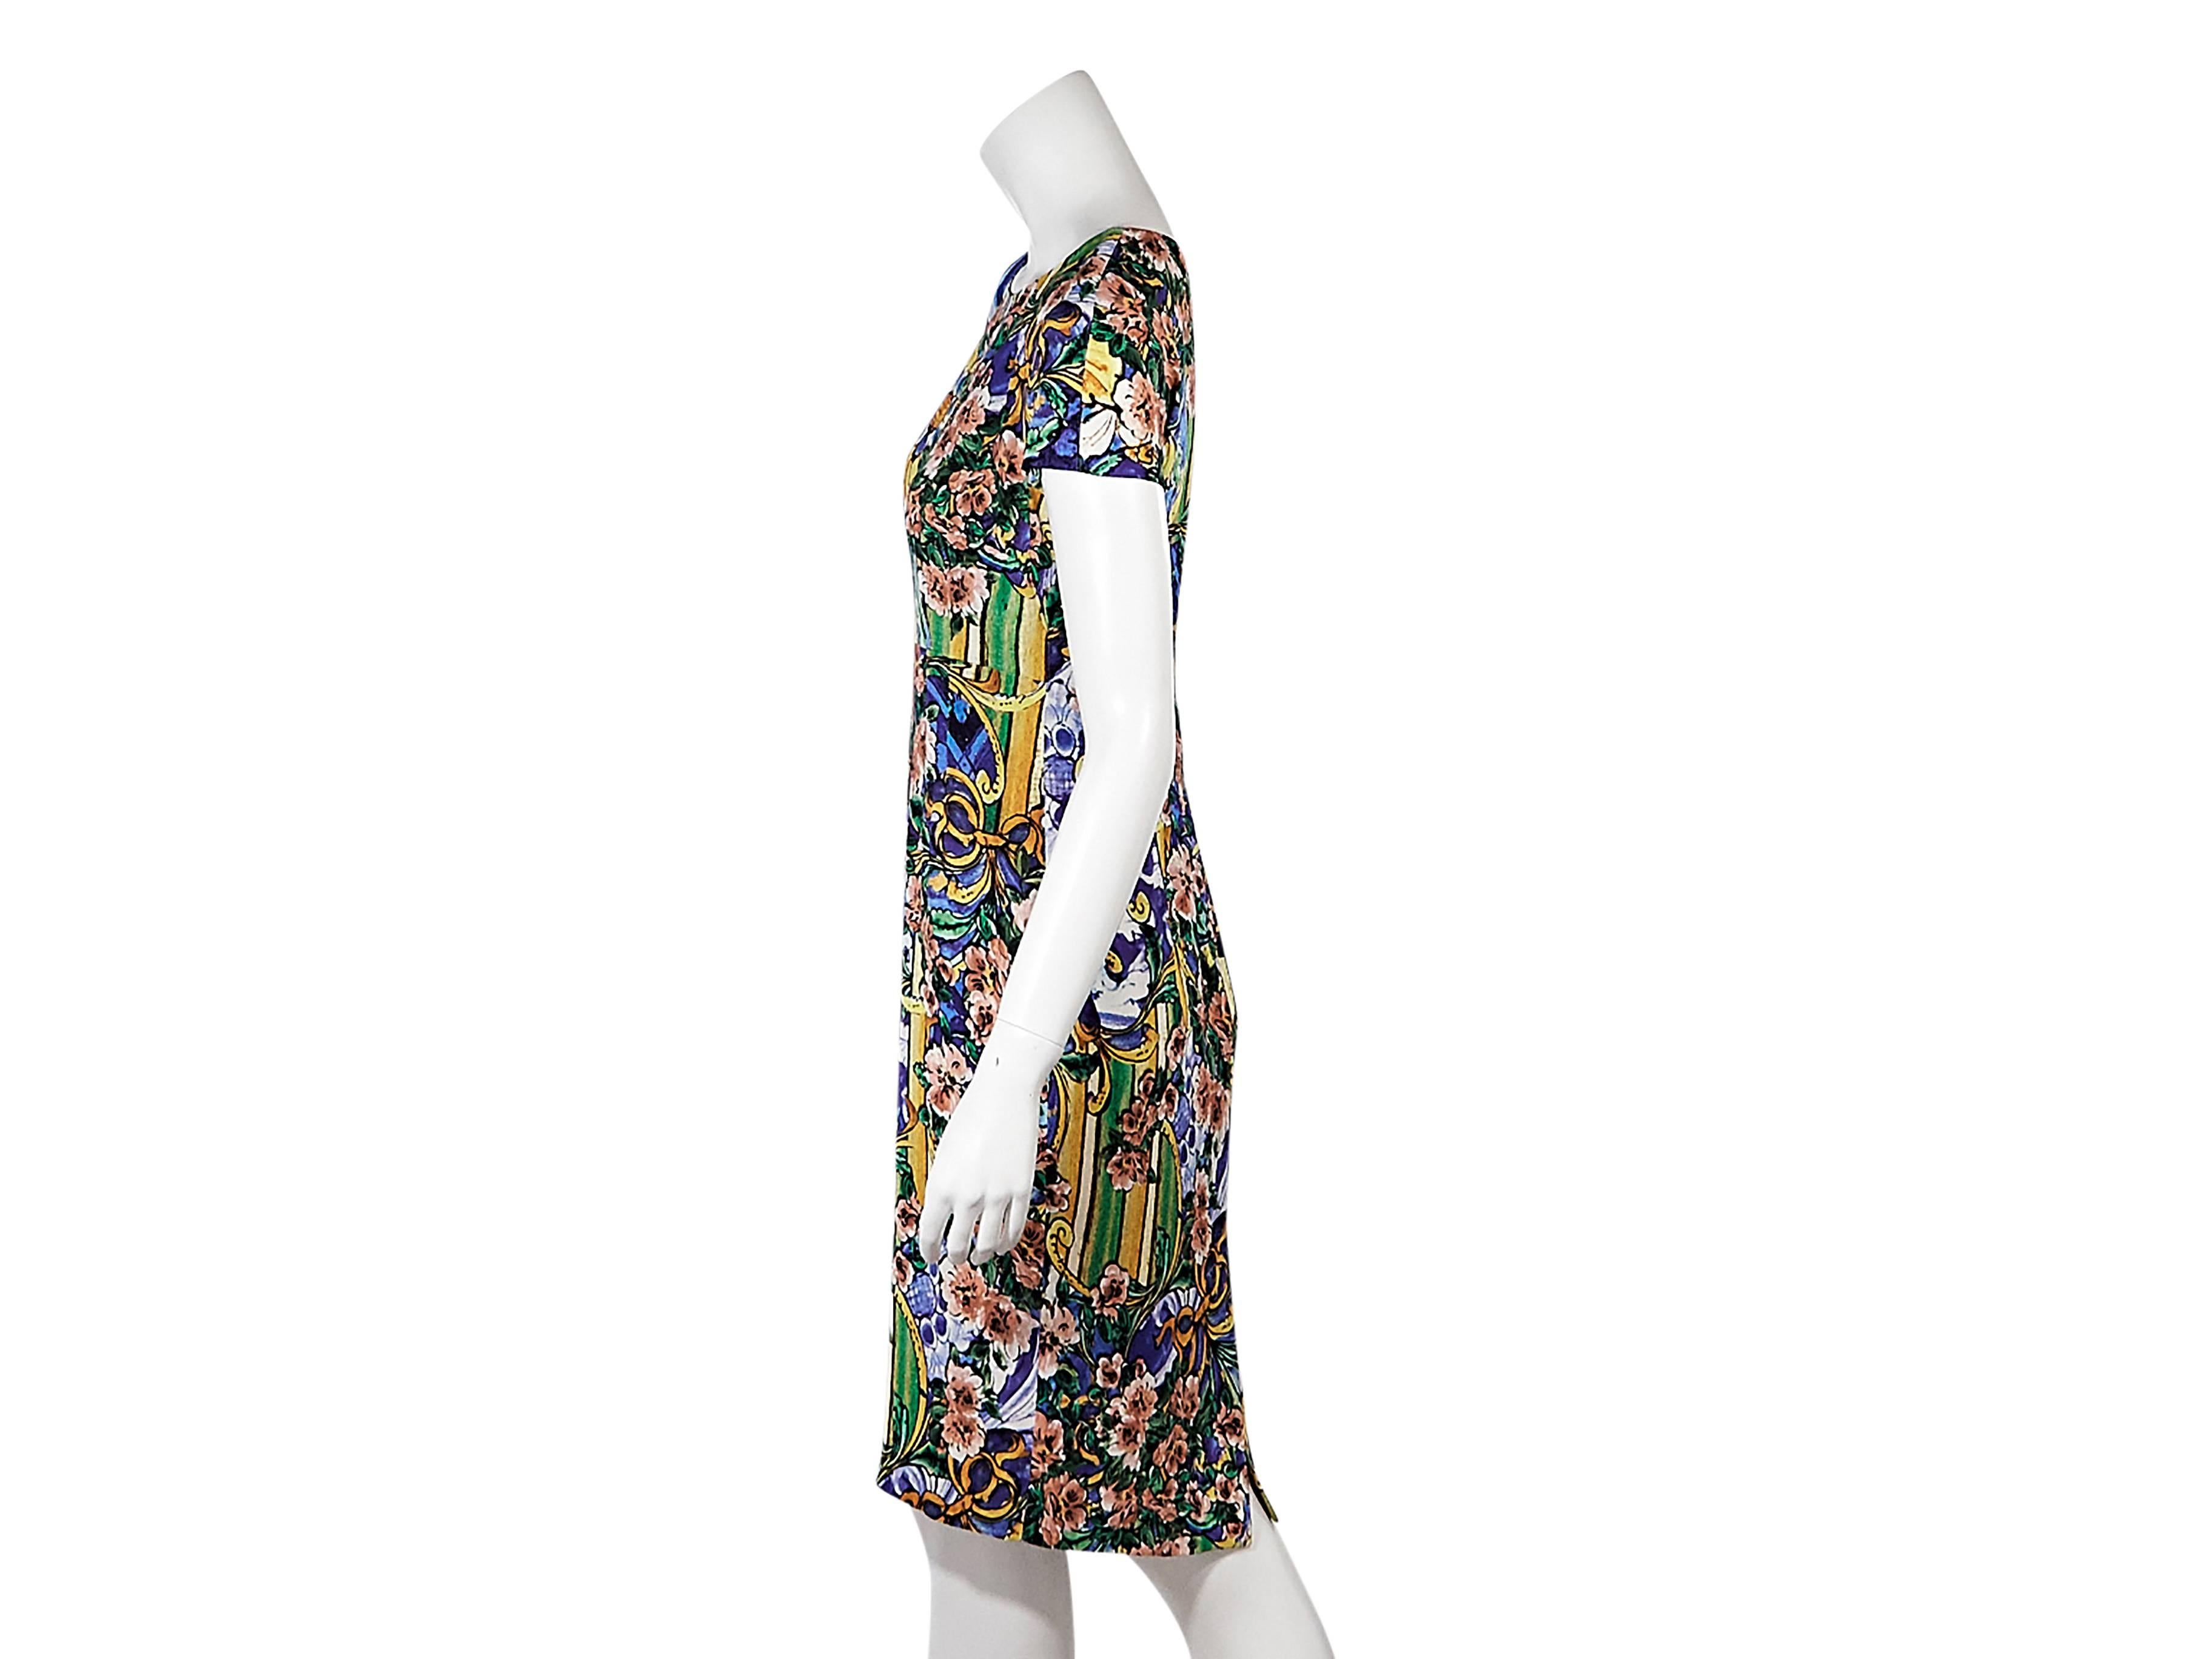 Product details:  Multicolor floral-printed sheath dress by Dolce & Gabbana.  From the Spring 2013 collection.  Jewelneck.  Short sleeves.  Concealed back zip closure.  Center back hem vent. Size S
Condition: Pre-owned. Very good.

Est. Retail $